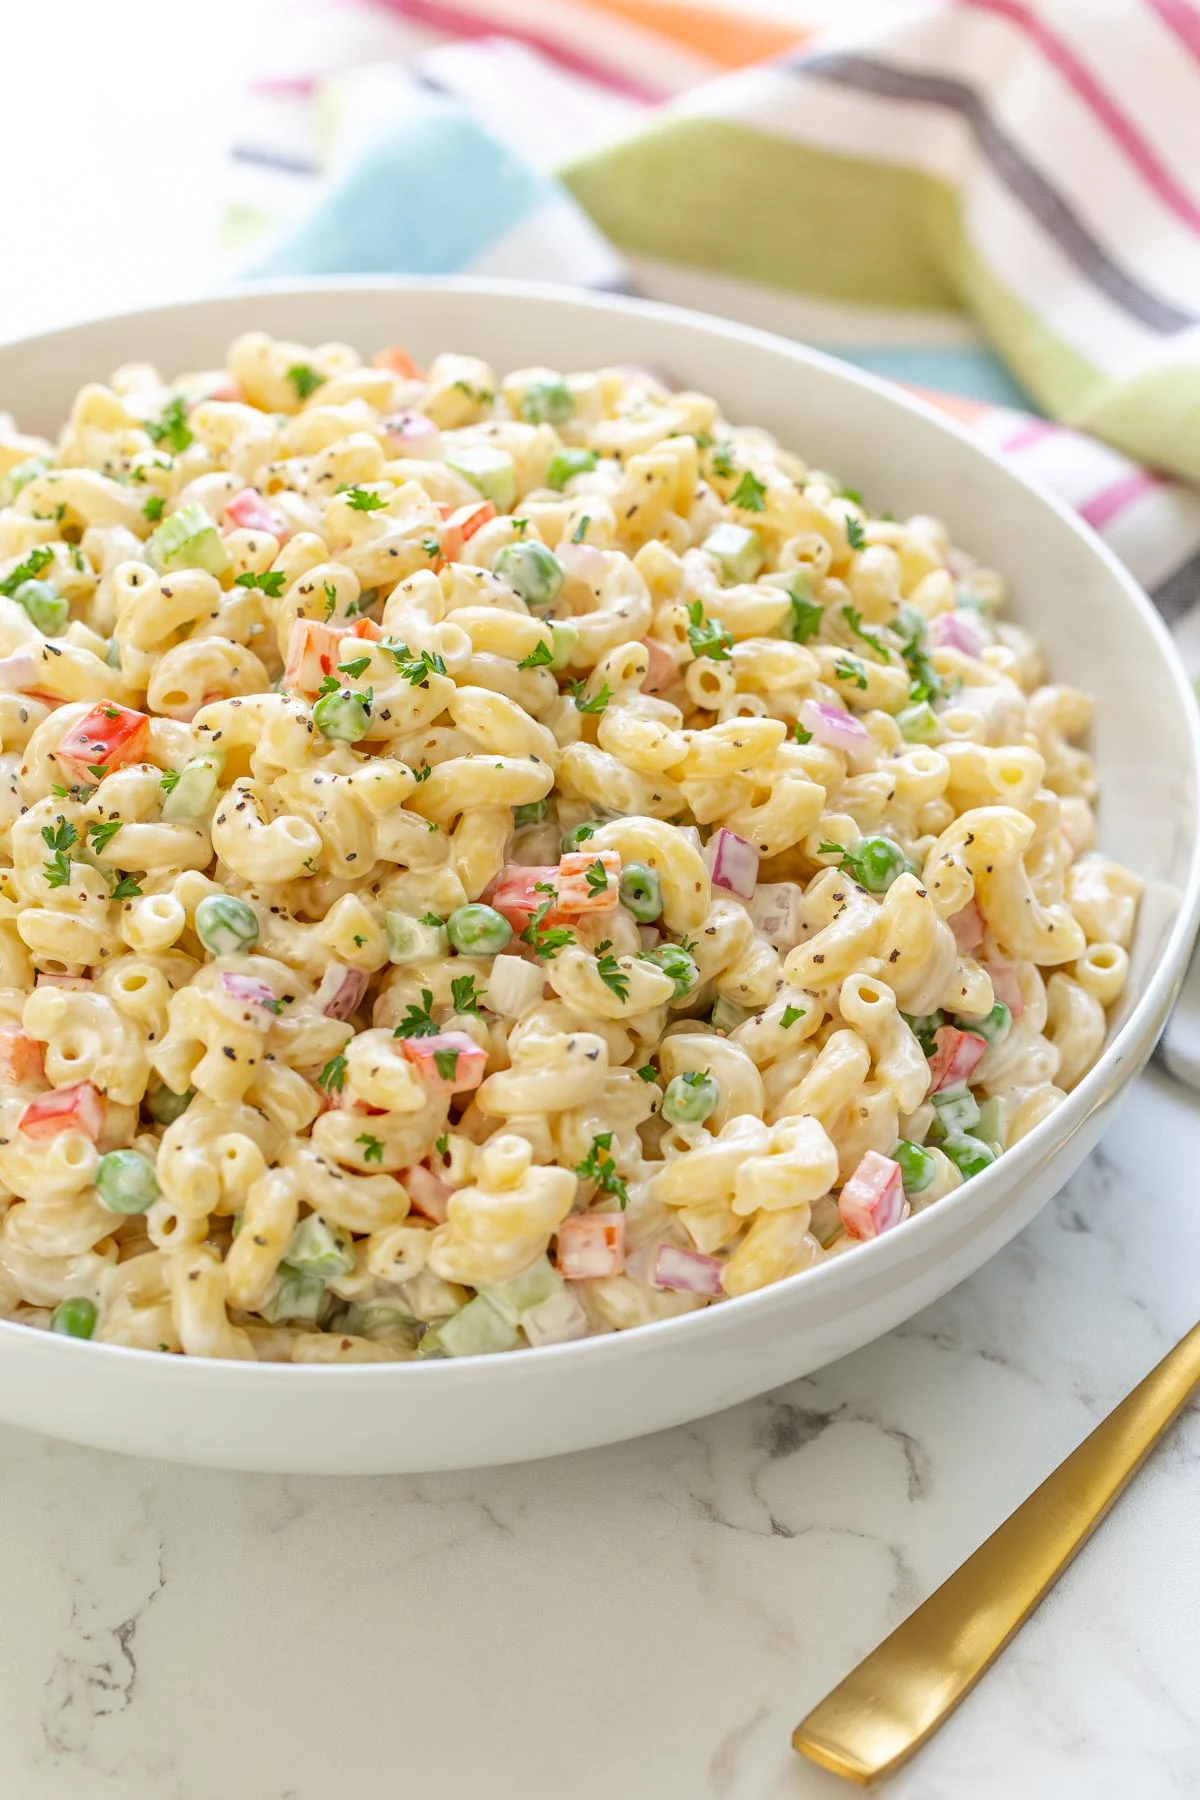 A side view of classic macaroni salad in a serving dish.